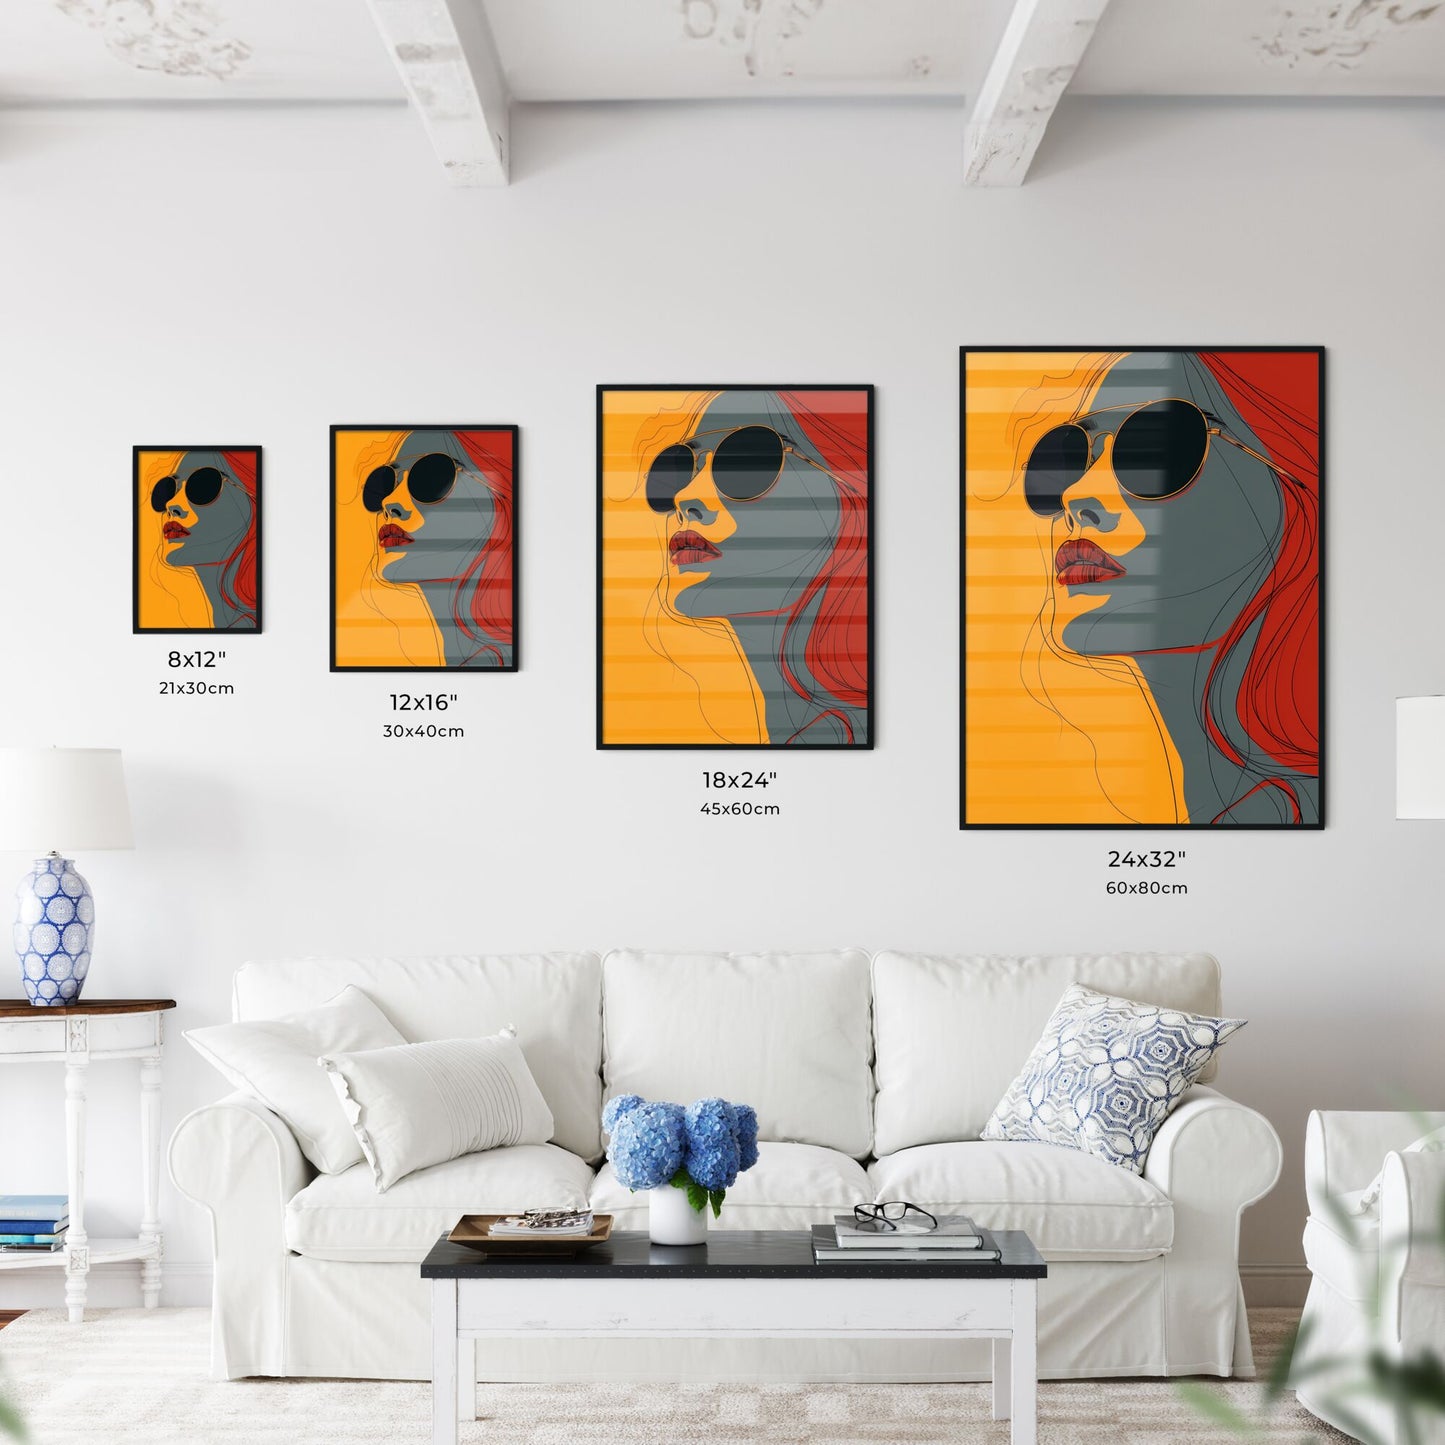 Geometric Abstract Art: Minimalistic 60s Girl Poster with Vibrant Geometric Shapes and Sunglasses Default Title